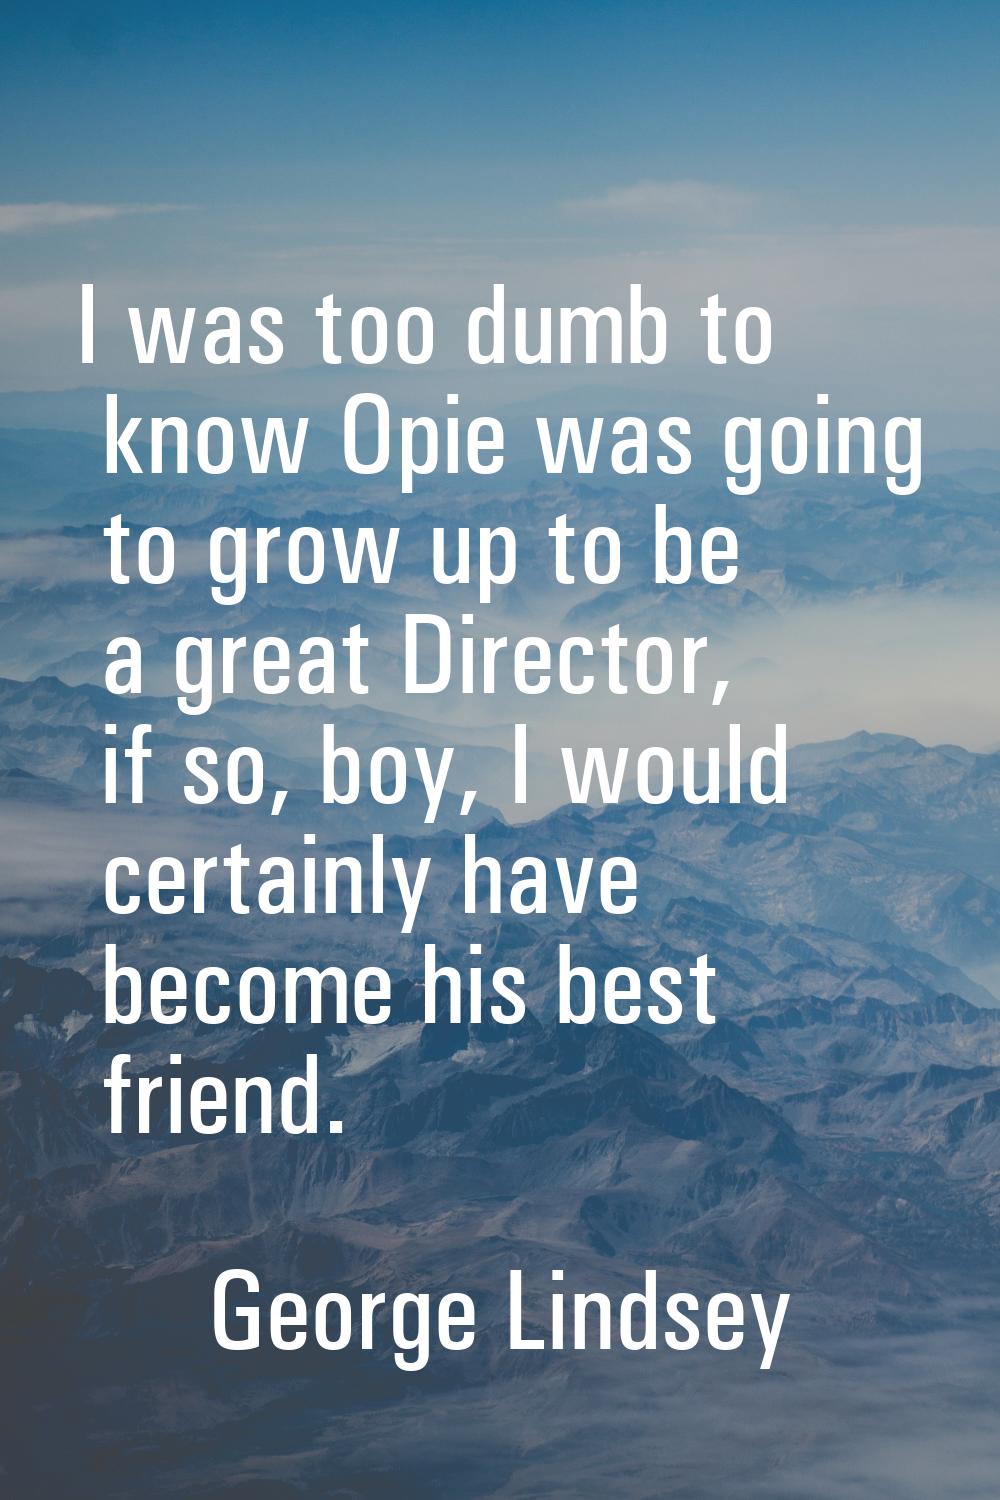 I was too dumb to know Opie was going to grow up to be a great Director, if so, boy, I would certai